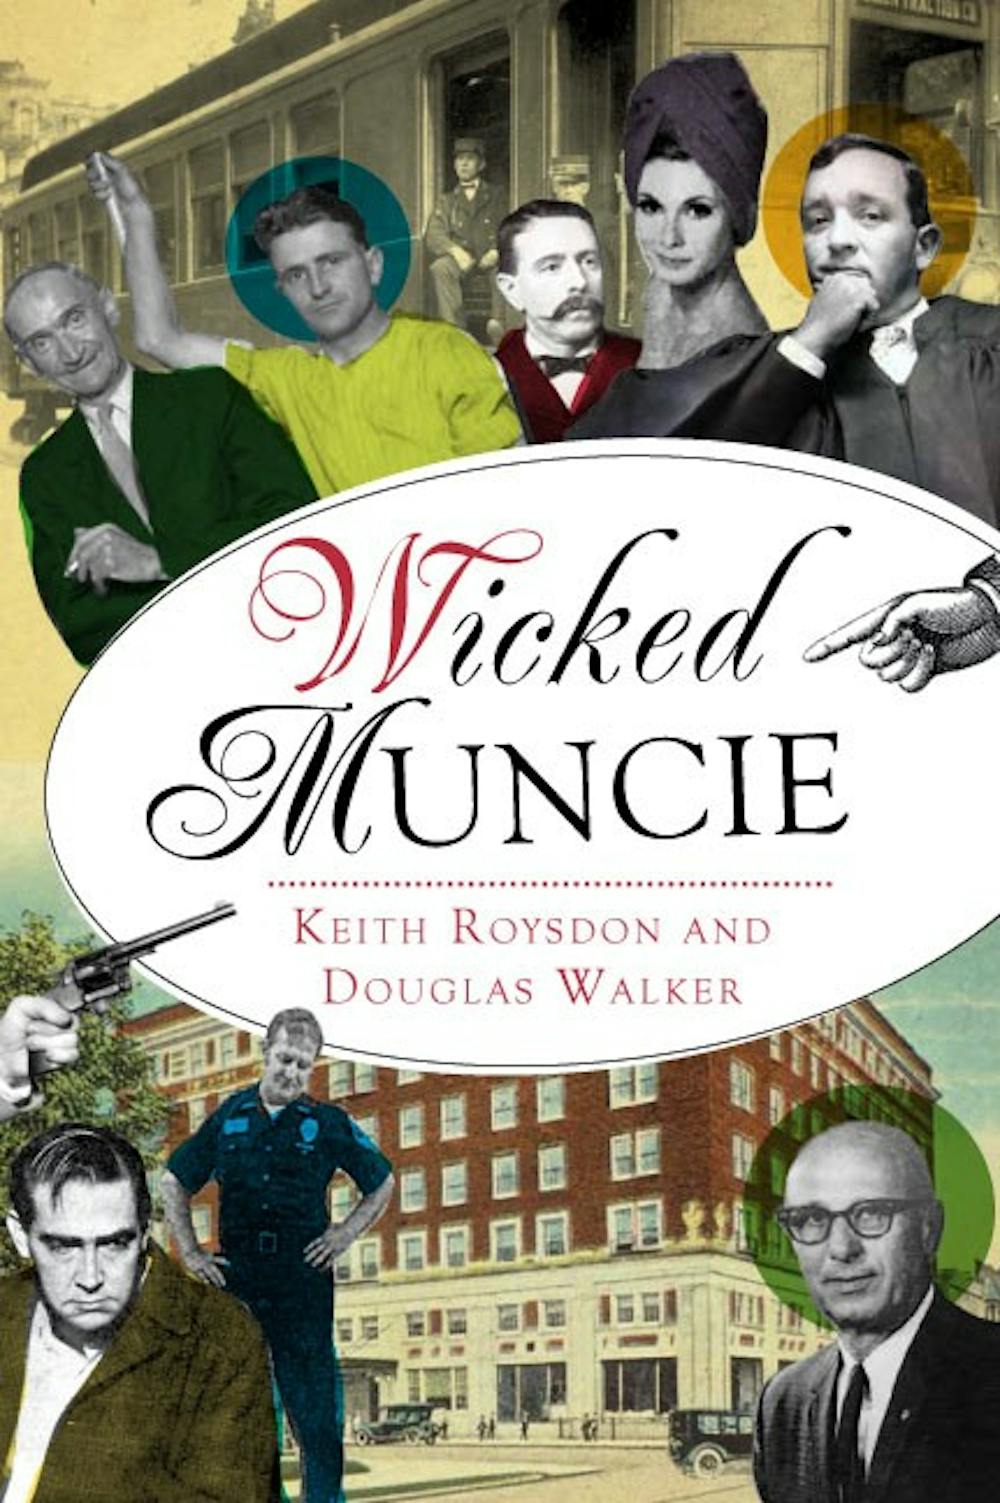 <p>Star Press reporters and authors Keith Roysdon and Douglas Walker wrote a book called "Wicked Muncie" and will host a book signing at the Muncie Mall&nbsp;Books-A-Million on Saturday from 1-3 p.m. Walker was contacted by book publisher&nbsp;The History Press after he wrote a story in 2015 for the Star Press on the history of crime in Muncie, and brought in Roysdon to write the Wicked books series.&nbsp;<em>Keith Roysdon // Photo Provided</em></p>